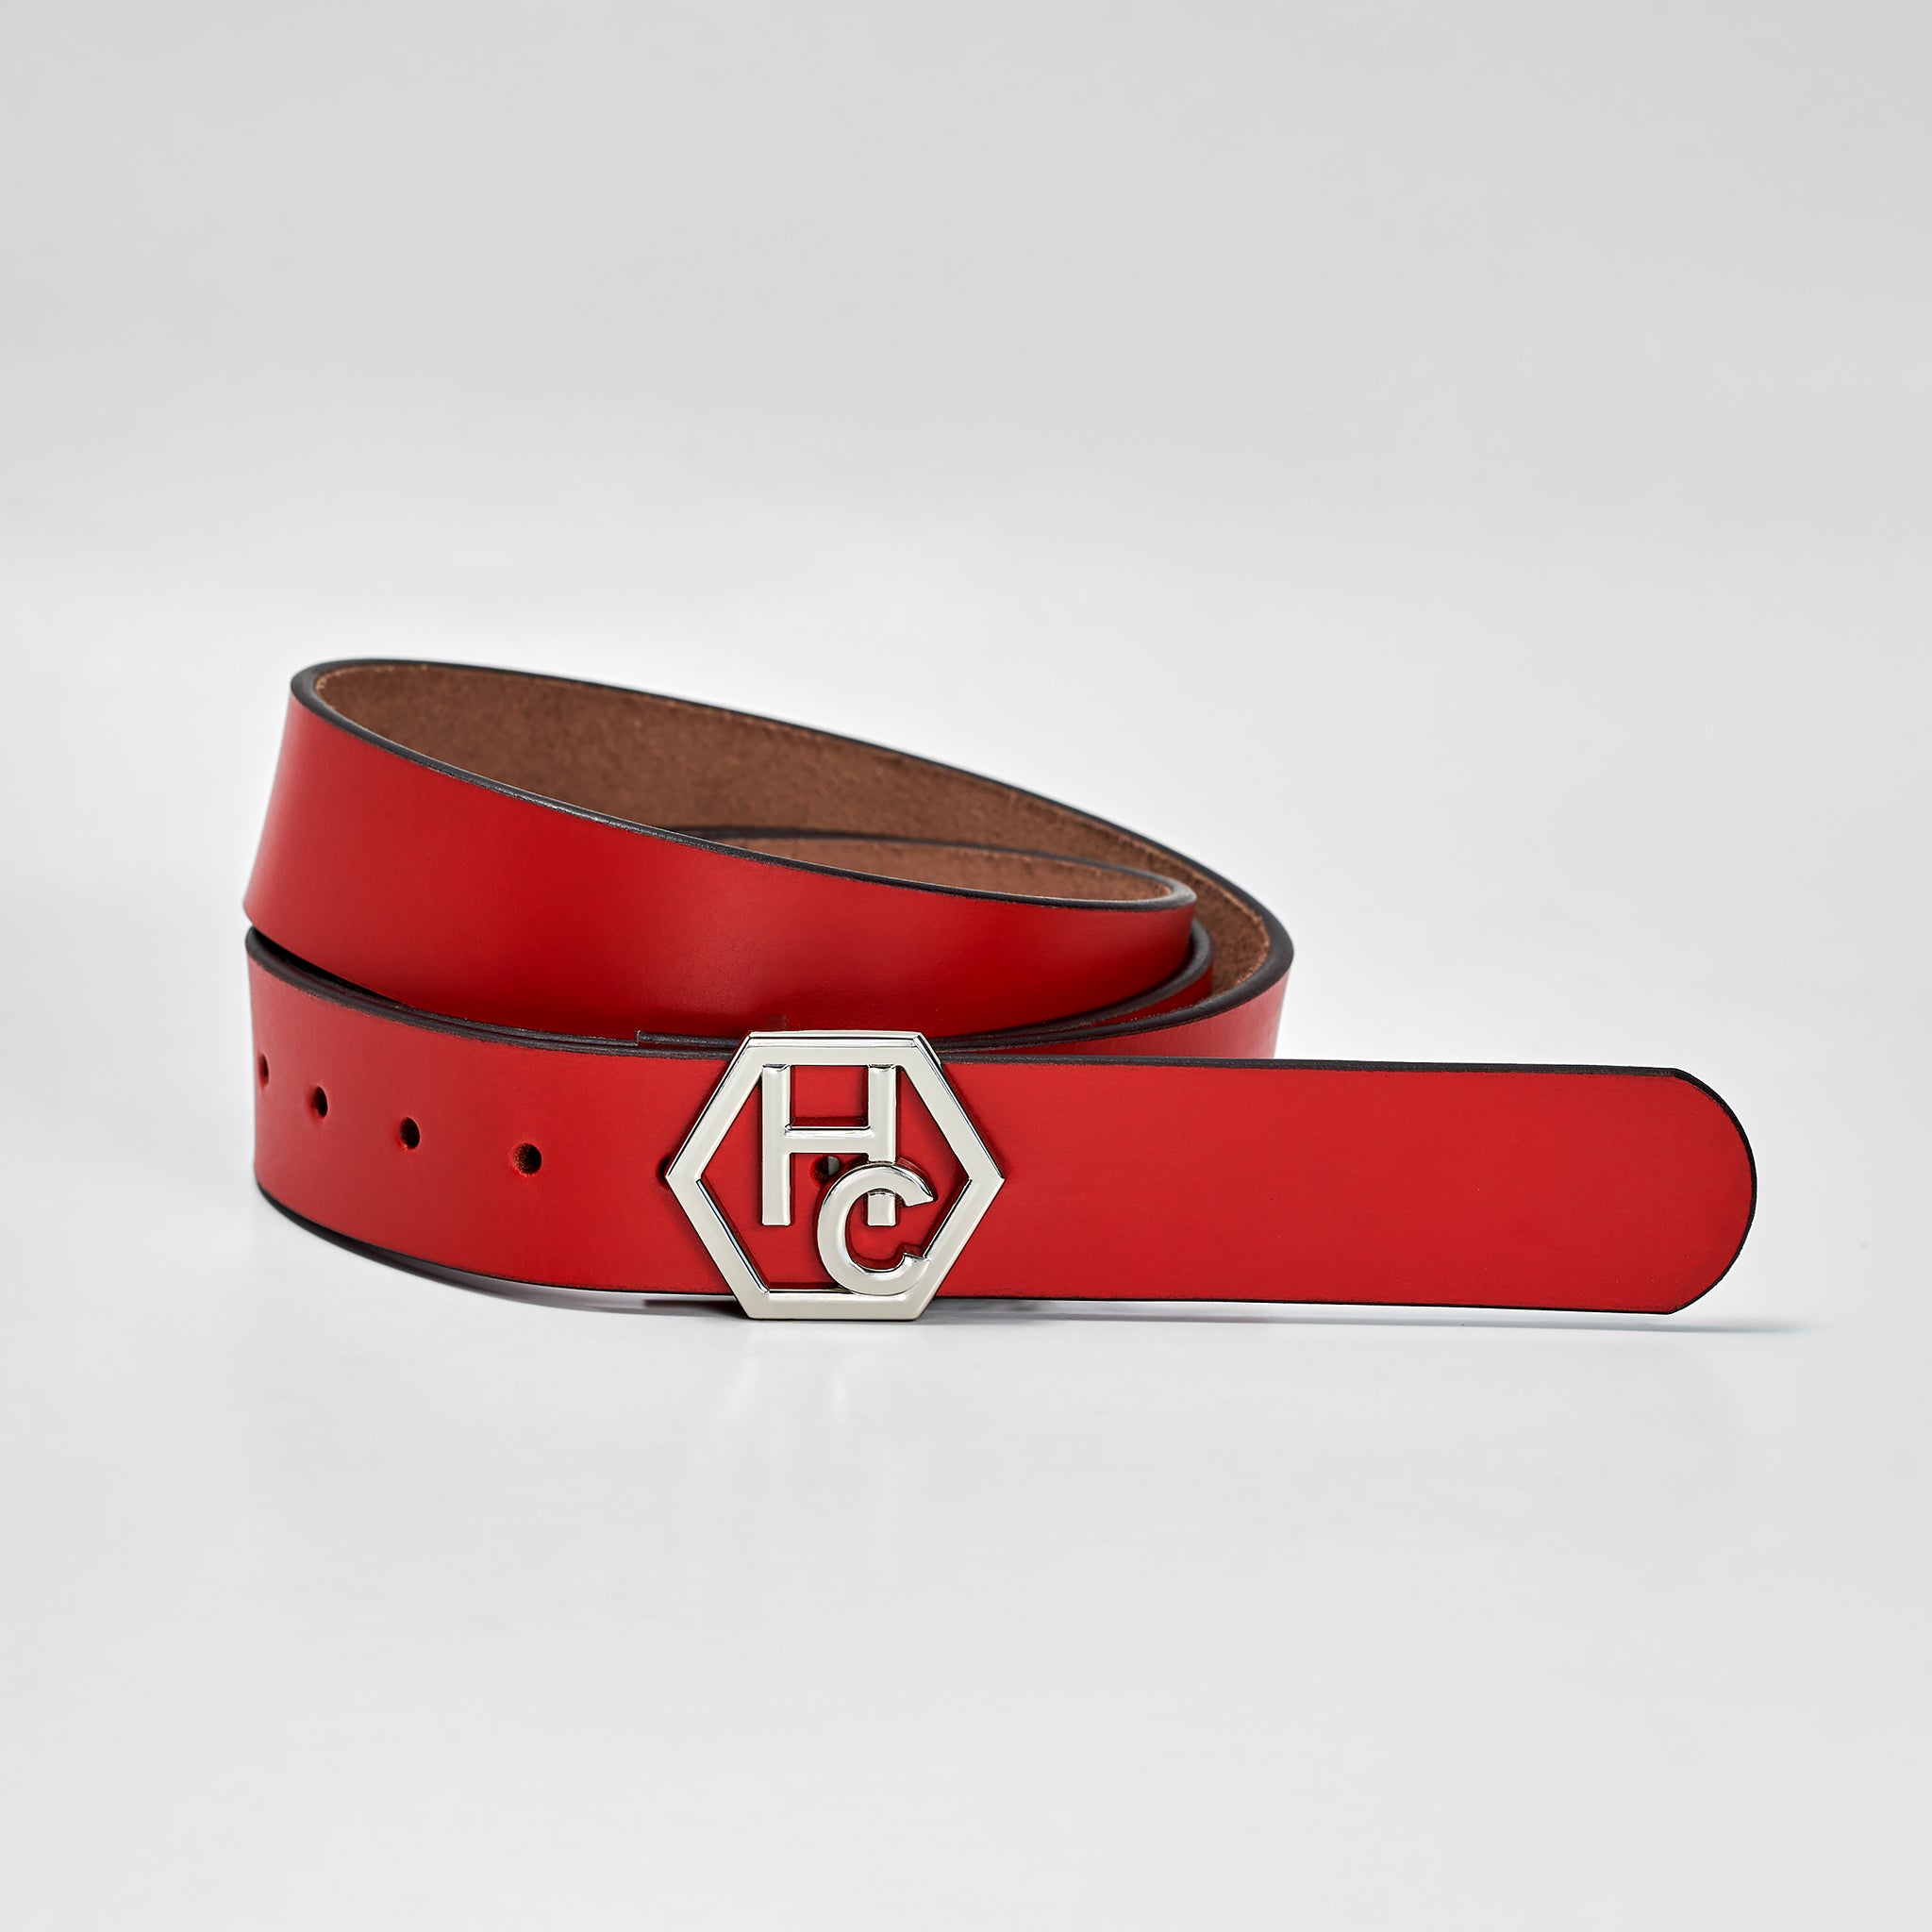 Hedonist Chicago Seamless Red Leather Belt 1.3" 32381272588439